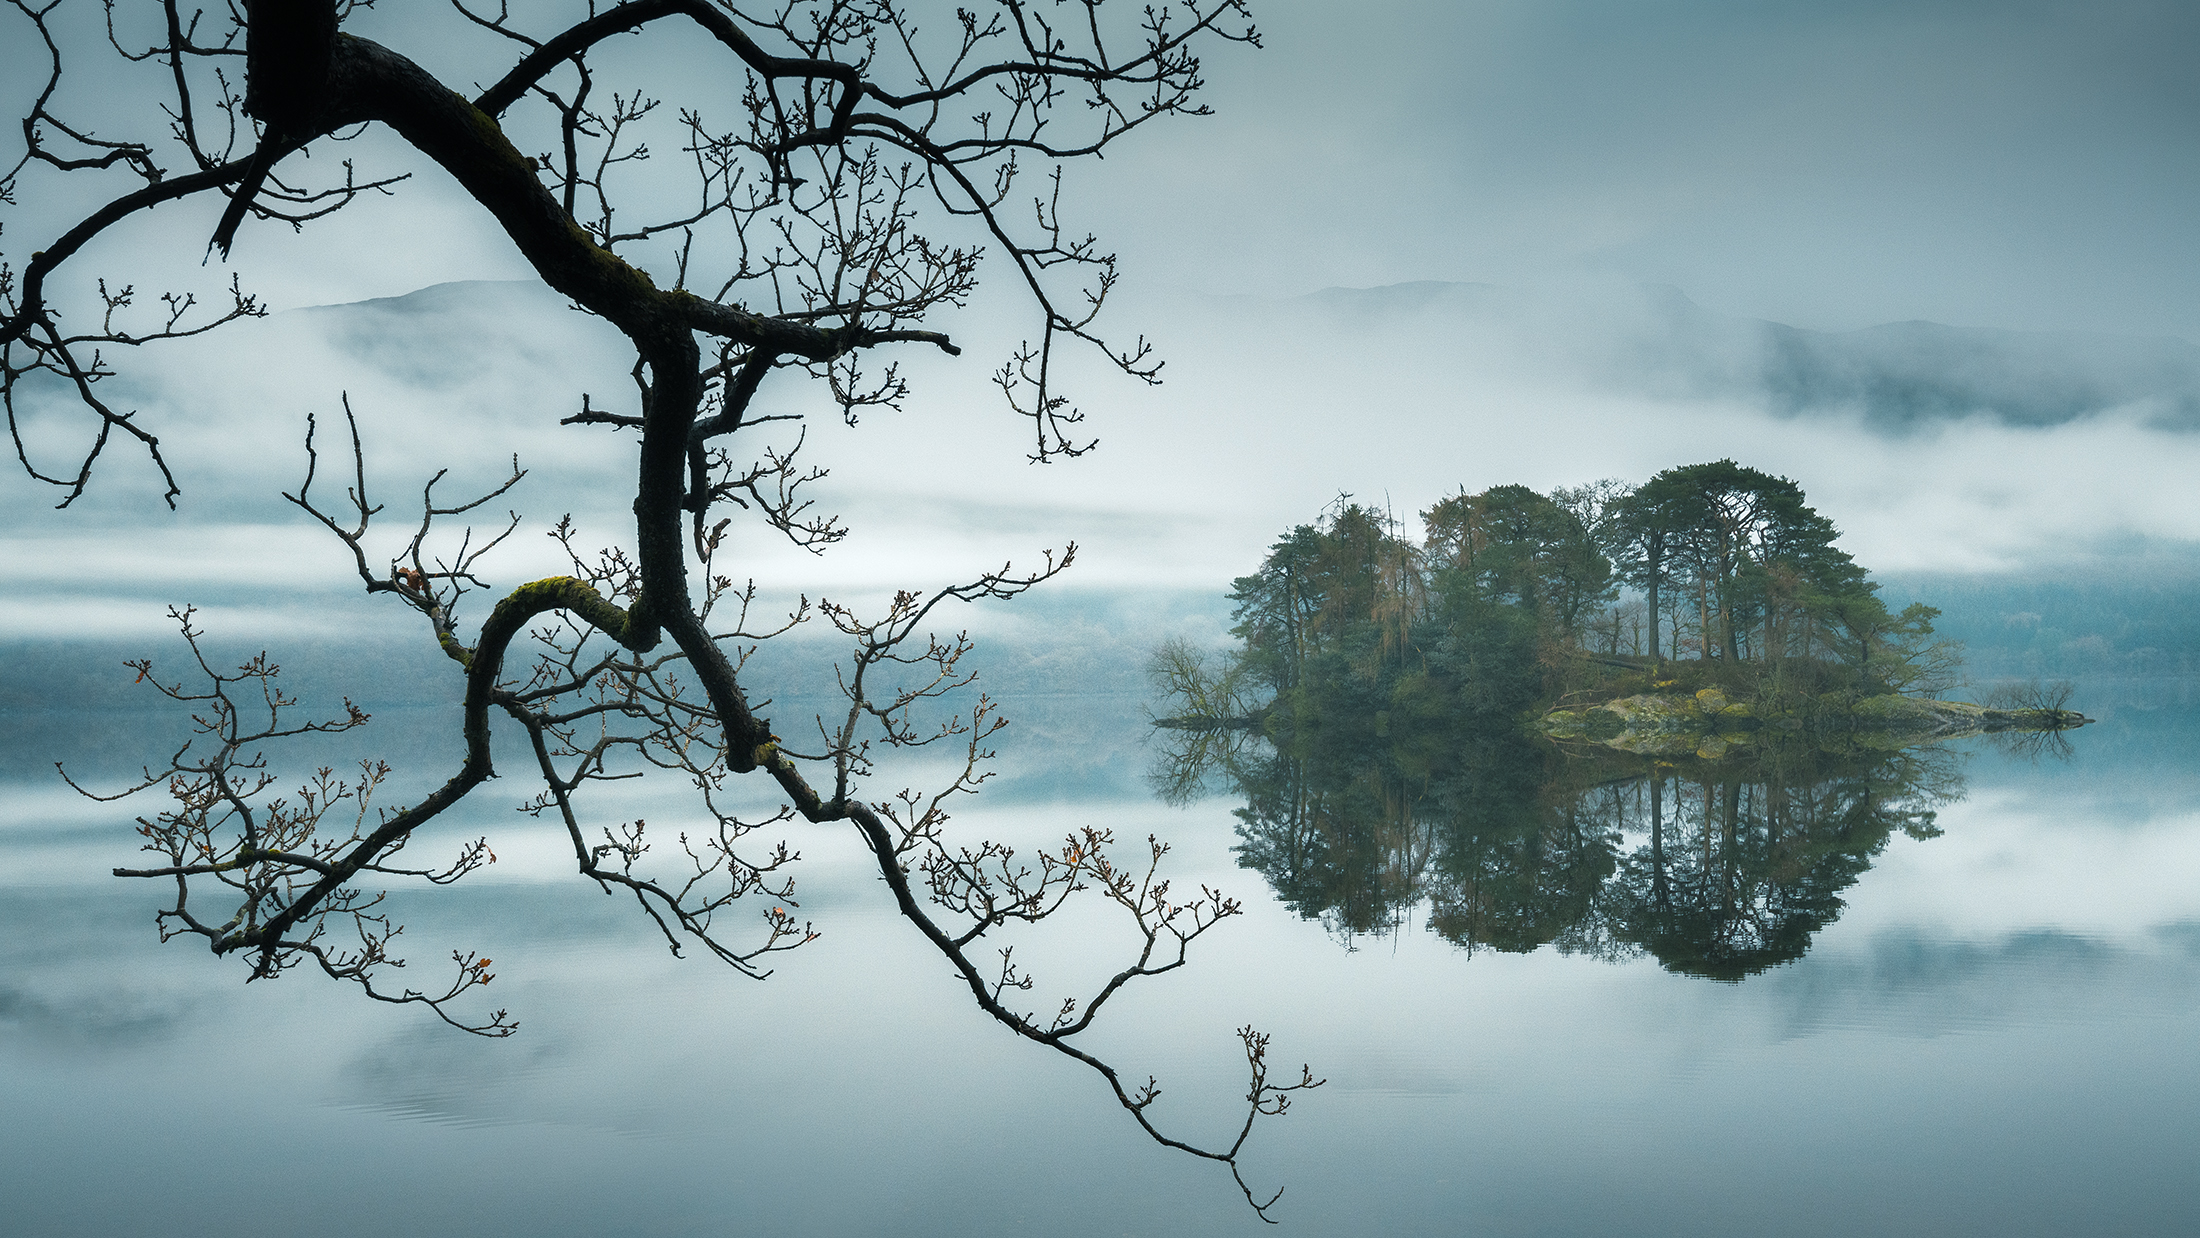 Sunrise Reflection In Loch Lomond And The Trossachs National Park Lake Wallpapers